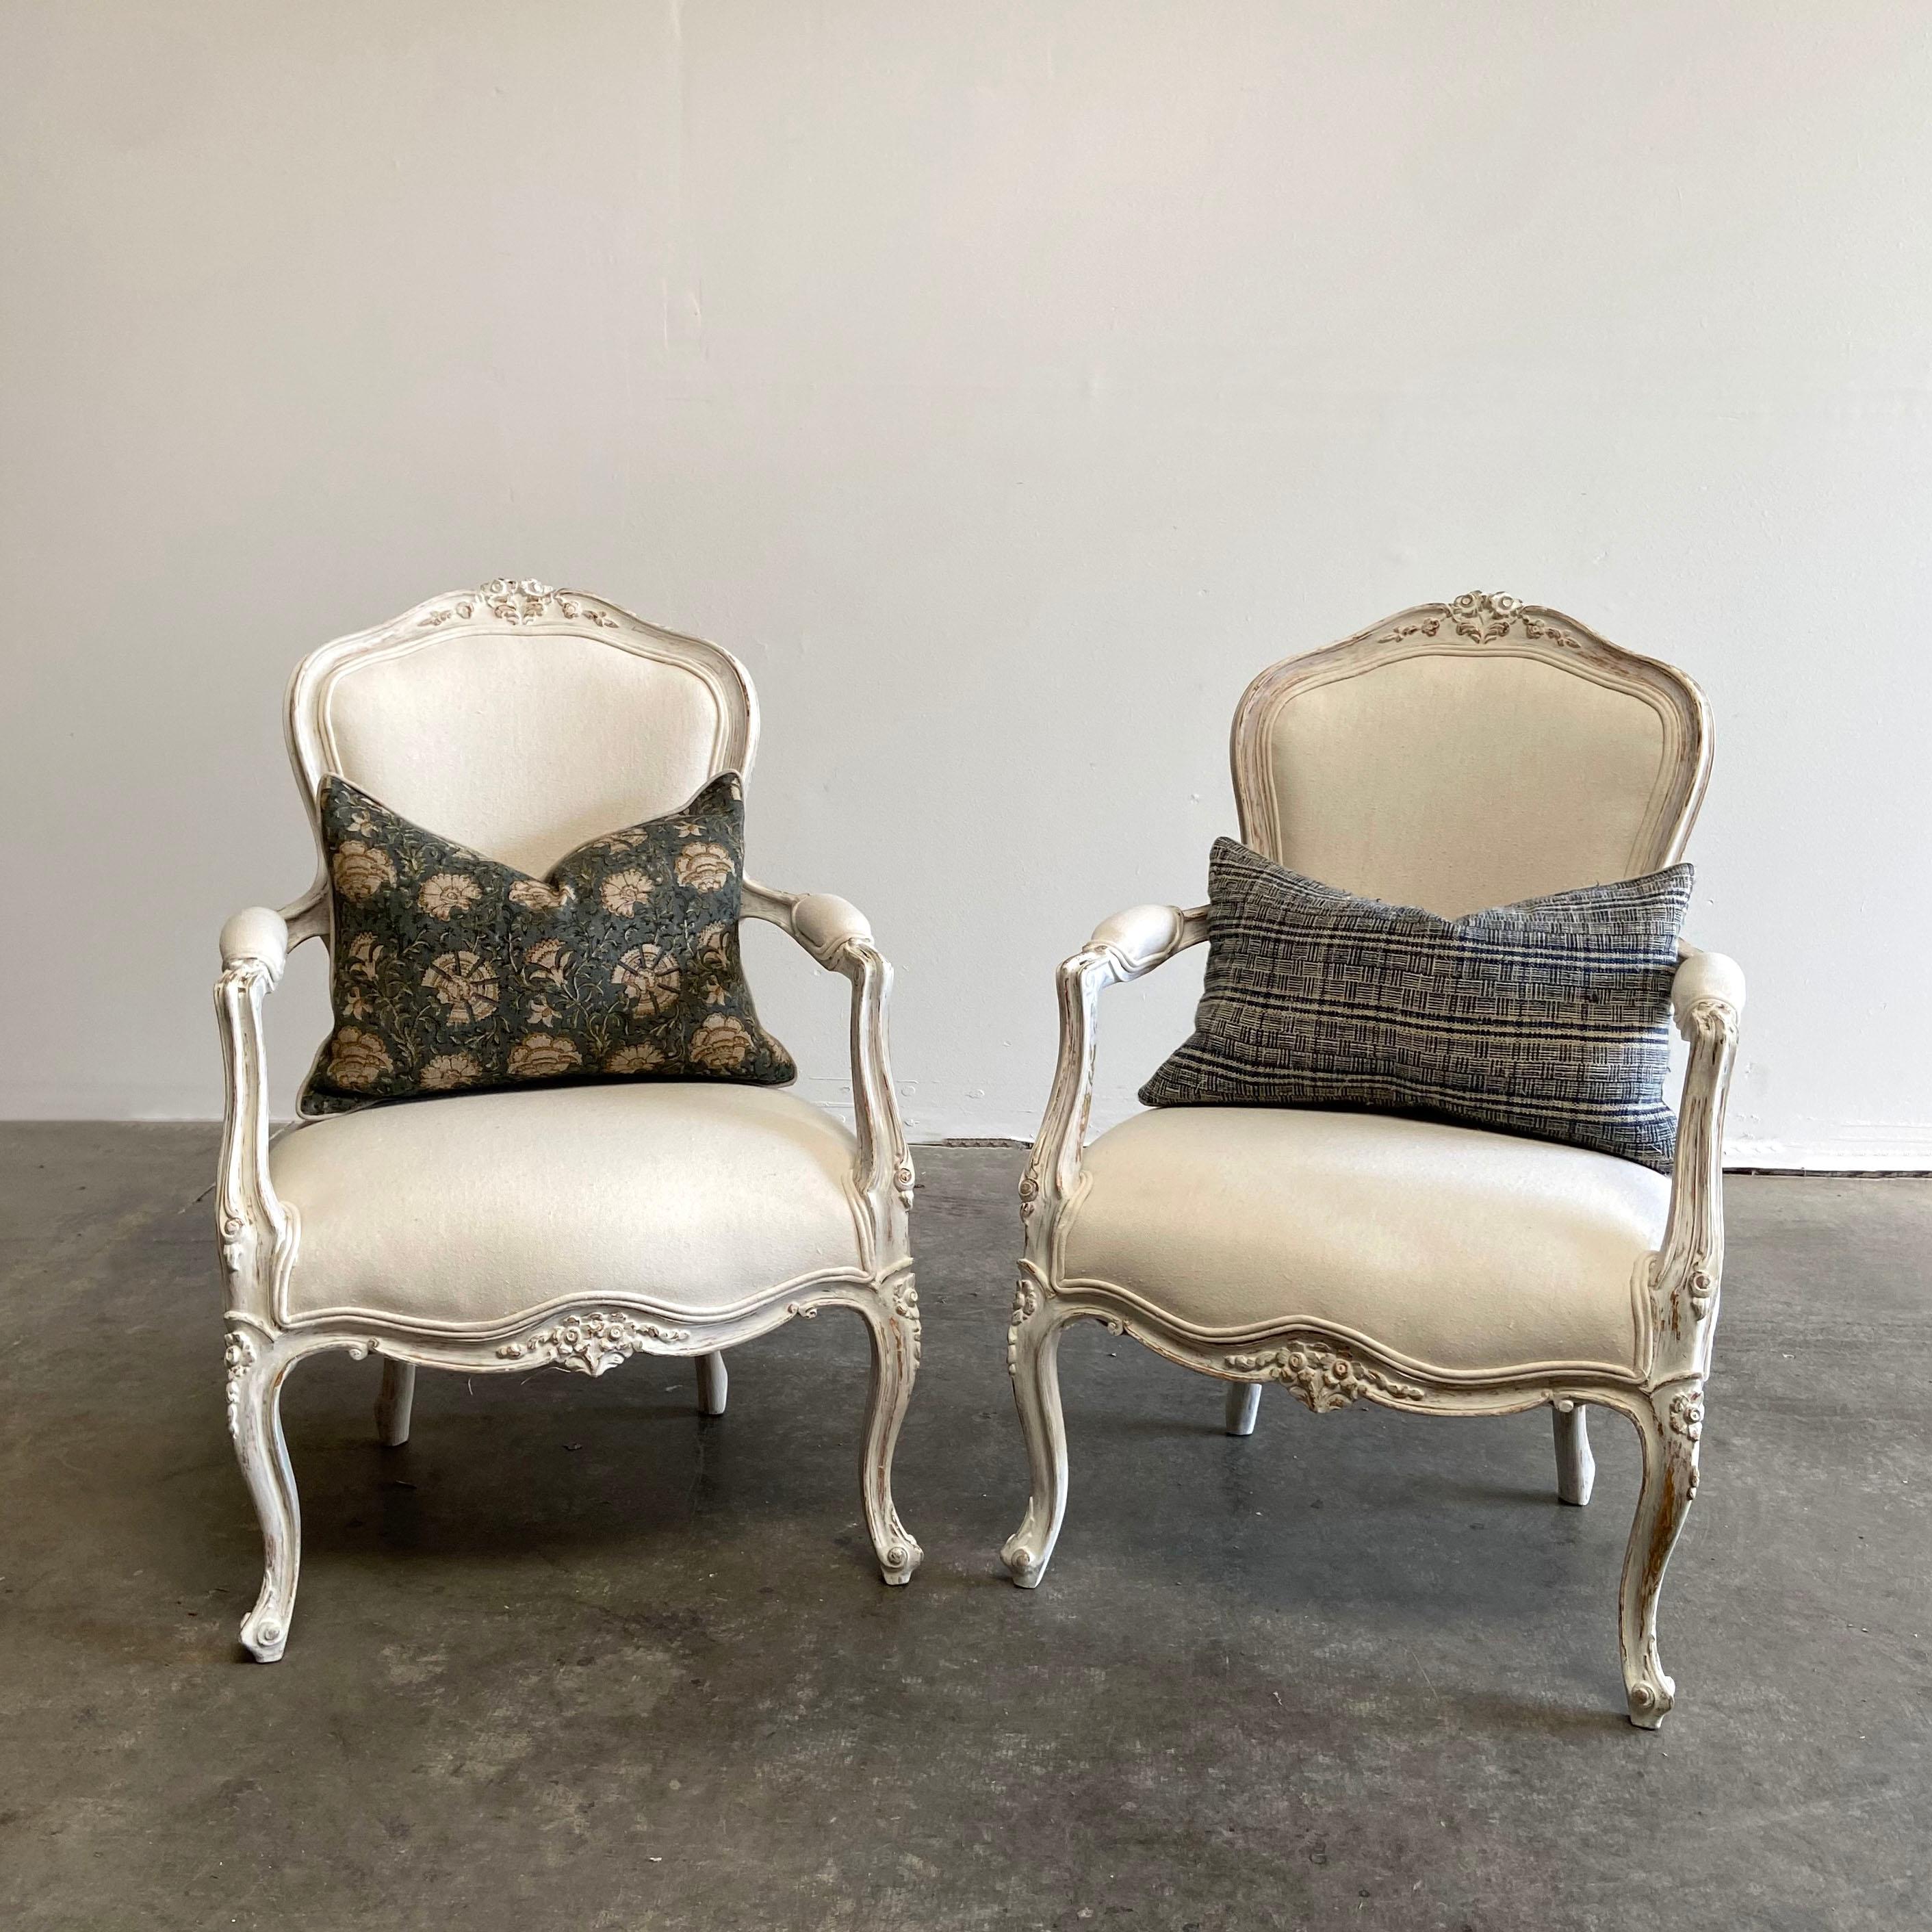 Vintage pair of painted and upholstered Louis XV style open armchairs
Beautiful painted chairs in soft white with subtle antique distressing. An oyster grey hue, with gilt flecks peeking through the paint. Soft rounded scrolls, and hand carved